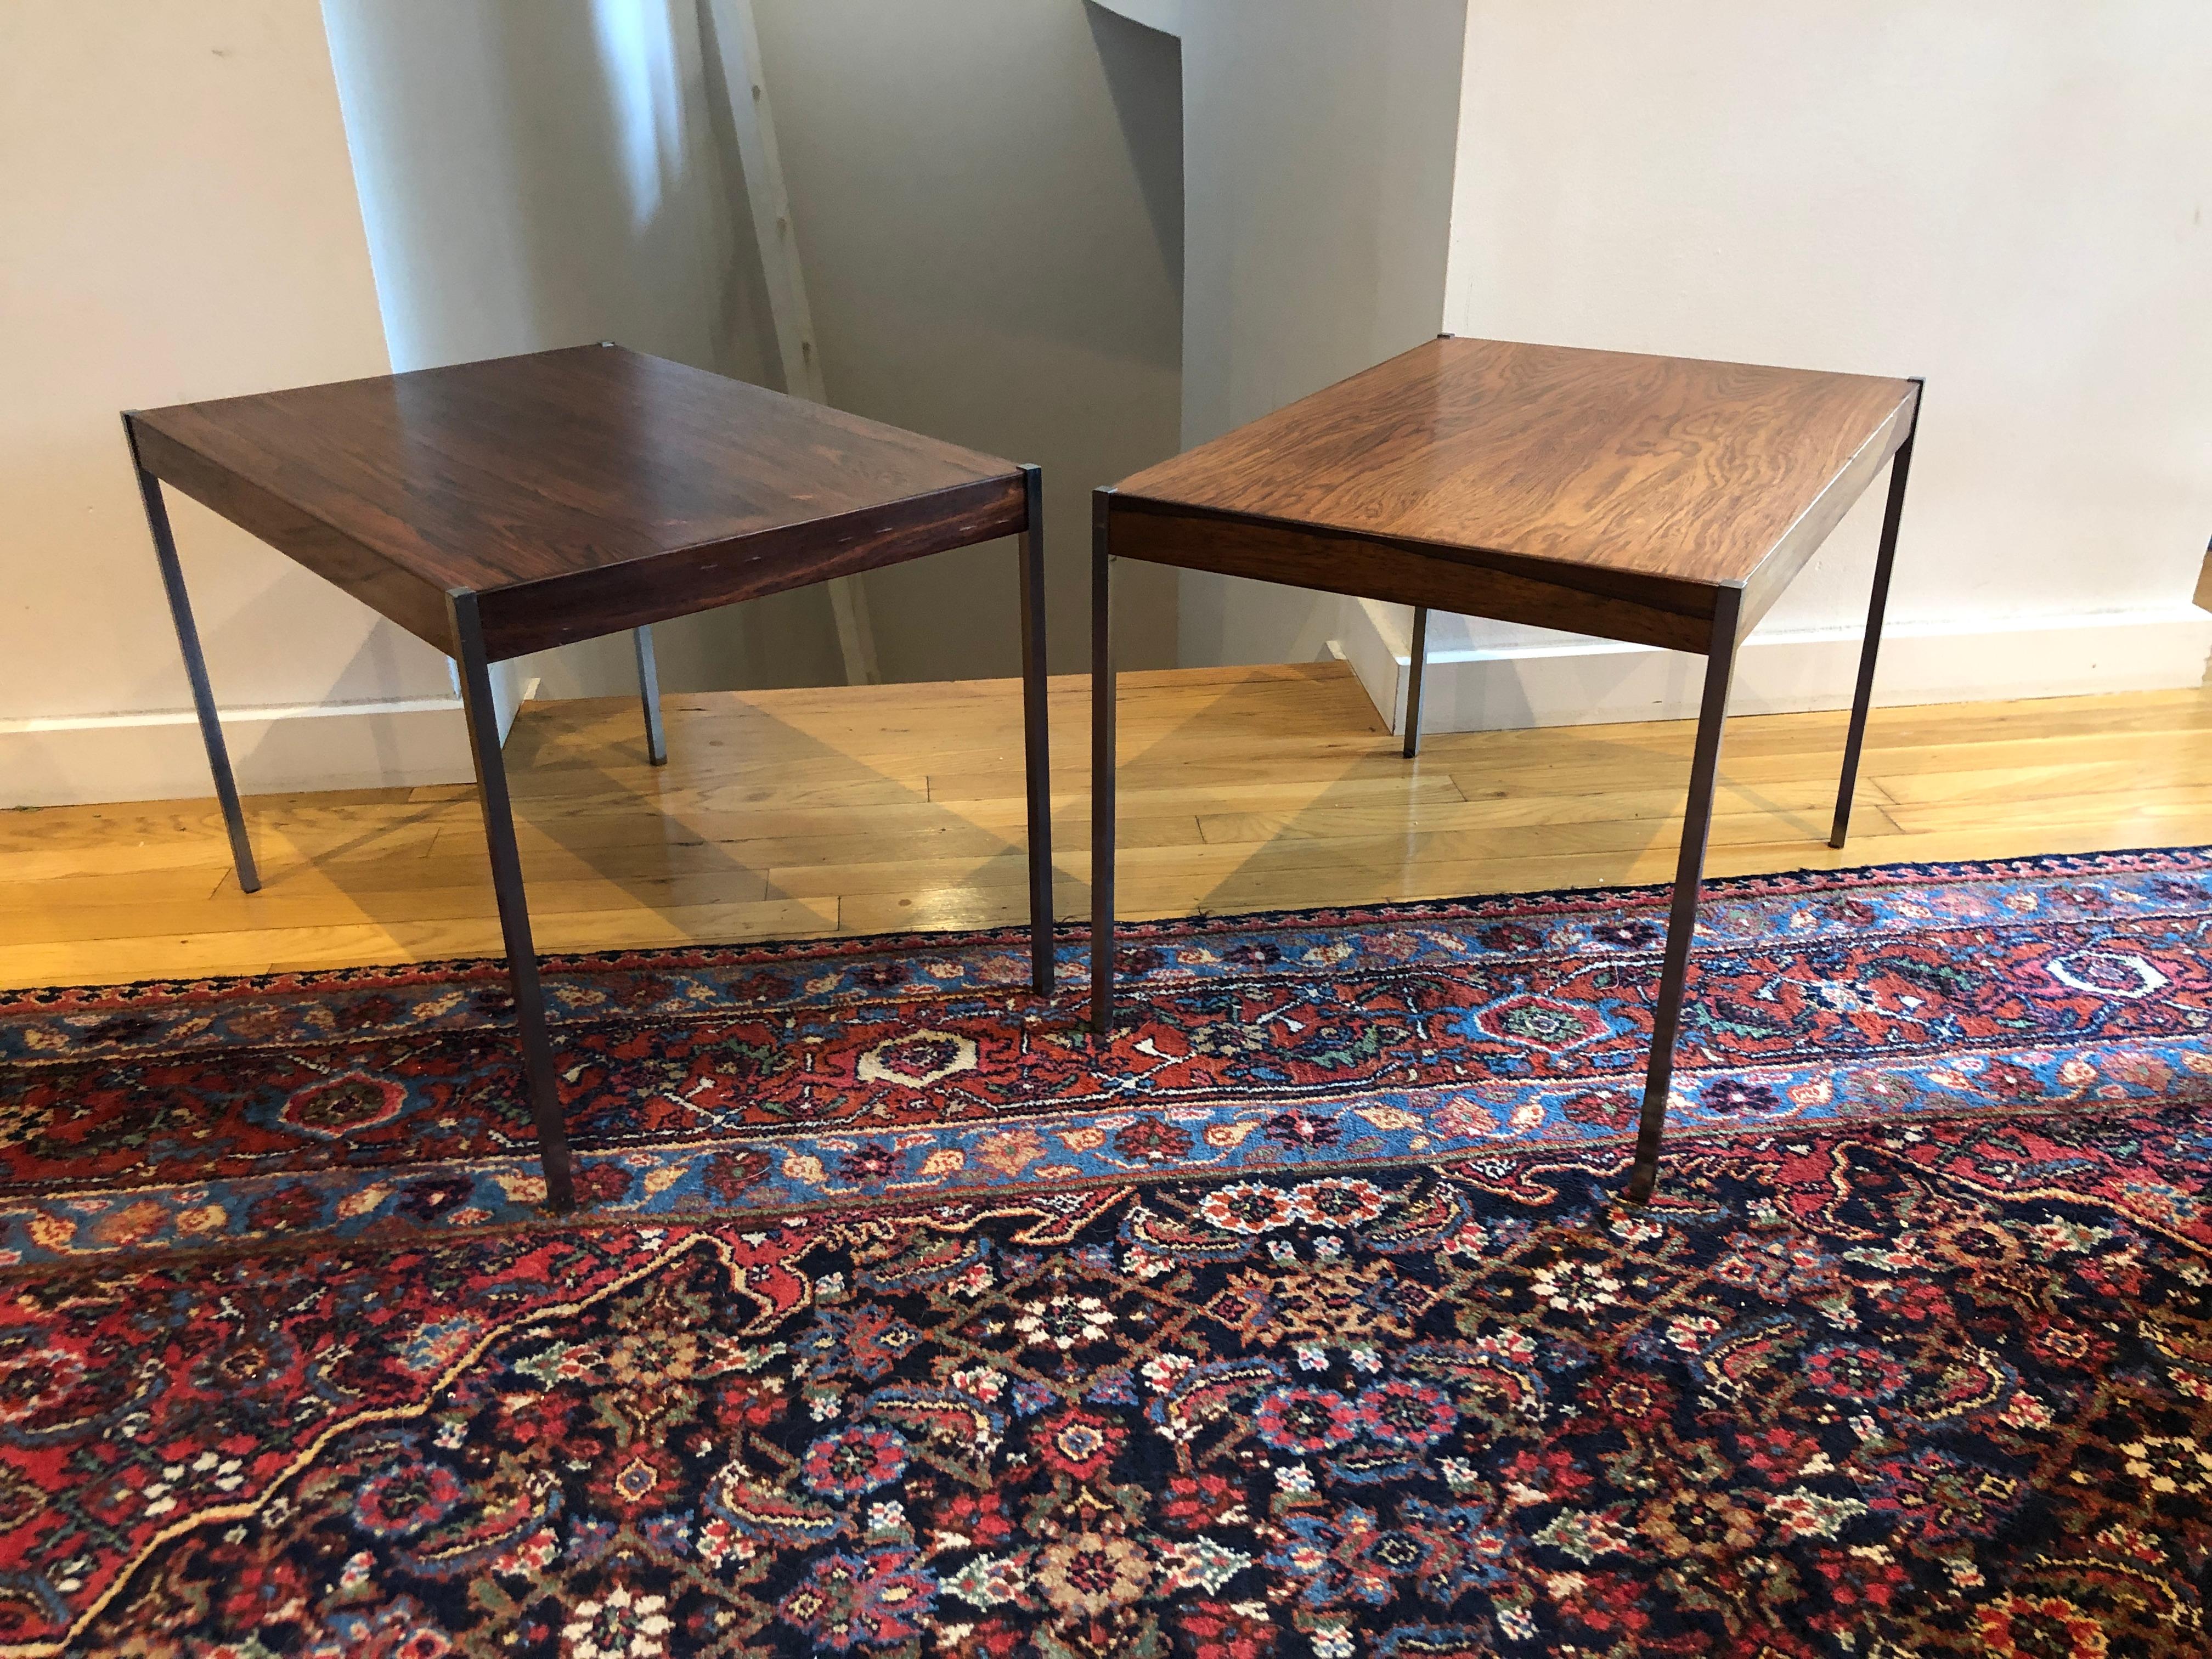 Brushed Pair of Rosewood and Aluminum Sidetables by Luxus